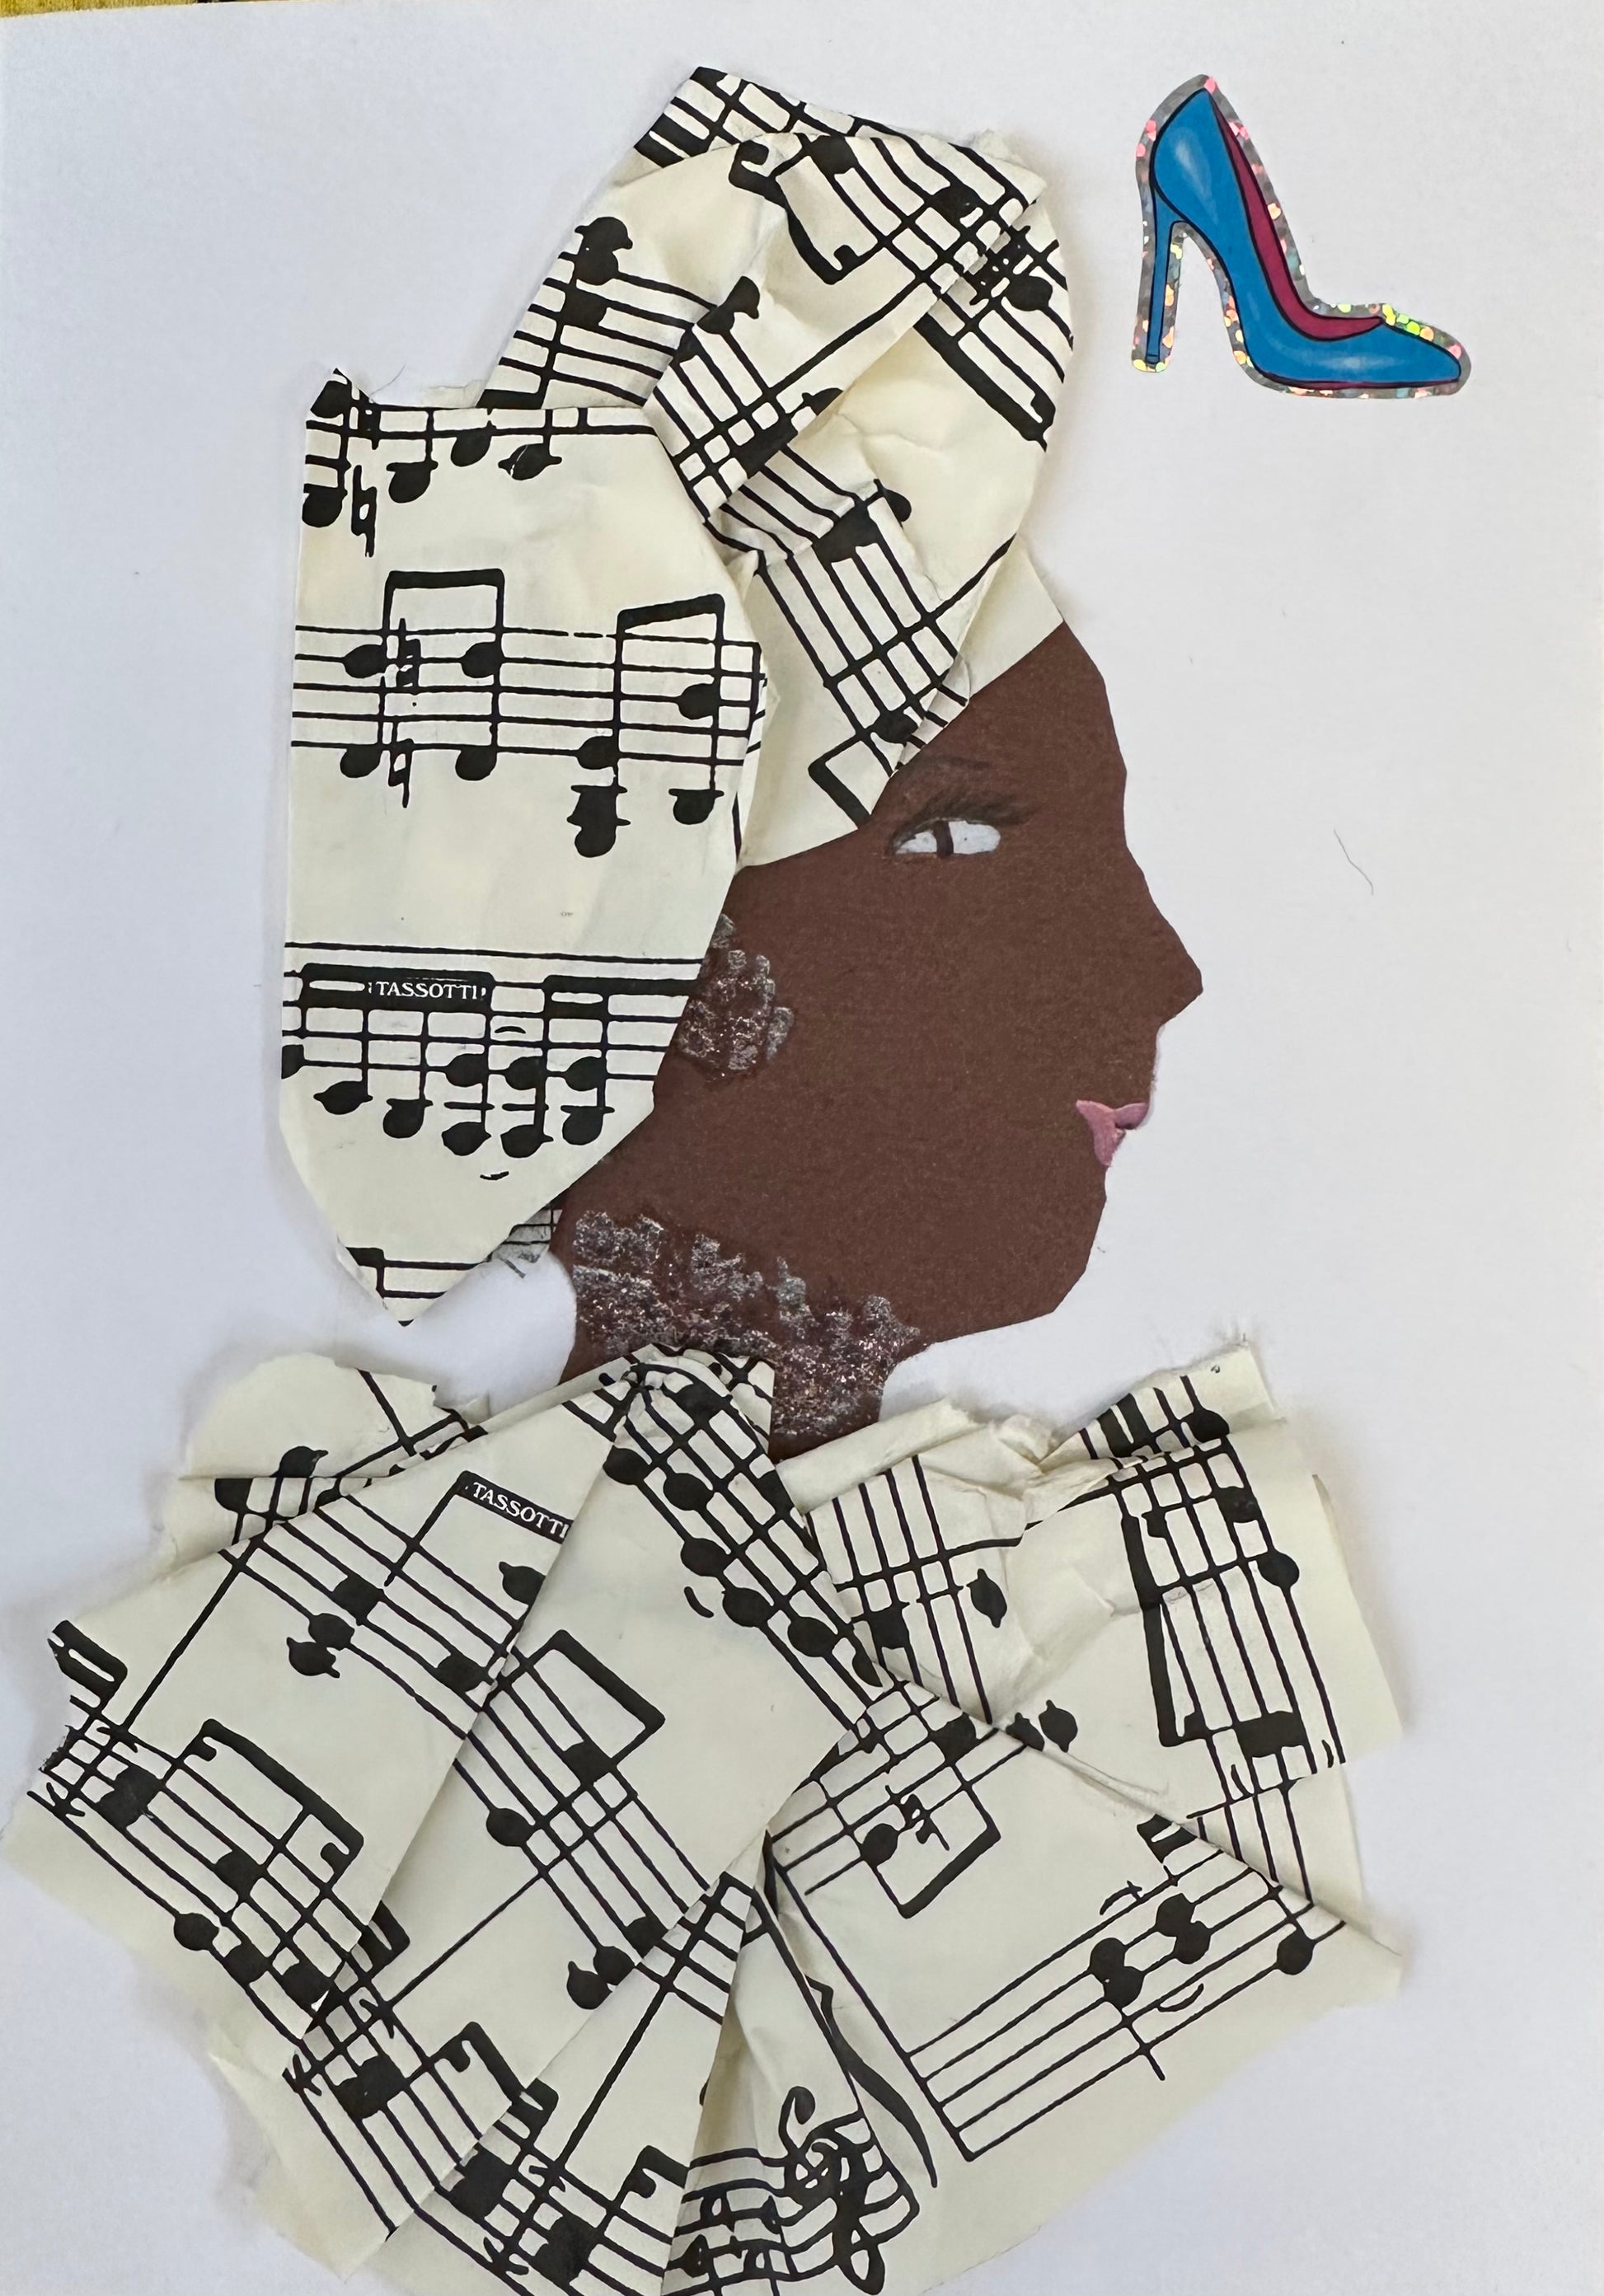 I designed this handmade card of a woman wearing a blouse and hatinator with the music notes. The cream colored paper and black music notes is complimented with jewllery and a teal heel in the corner.